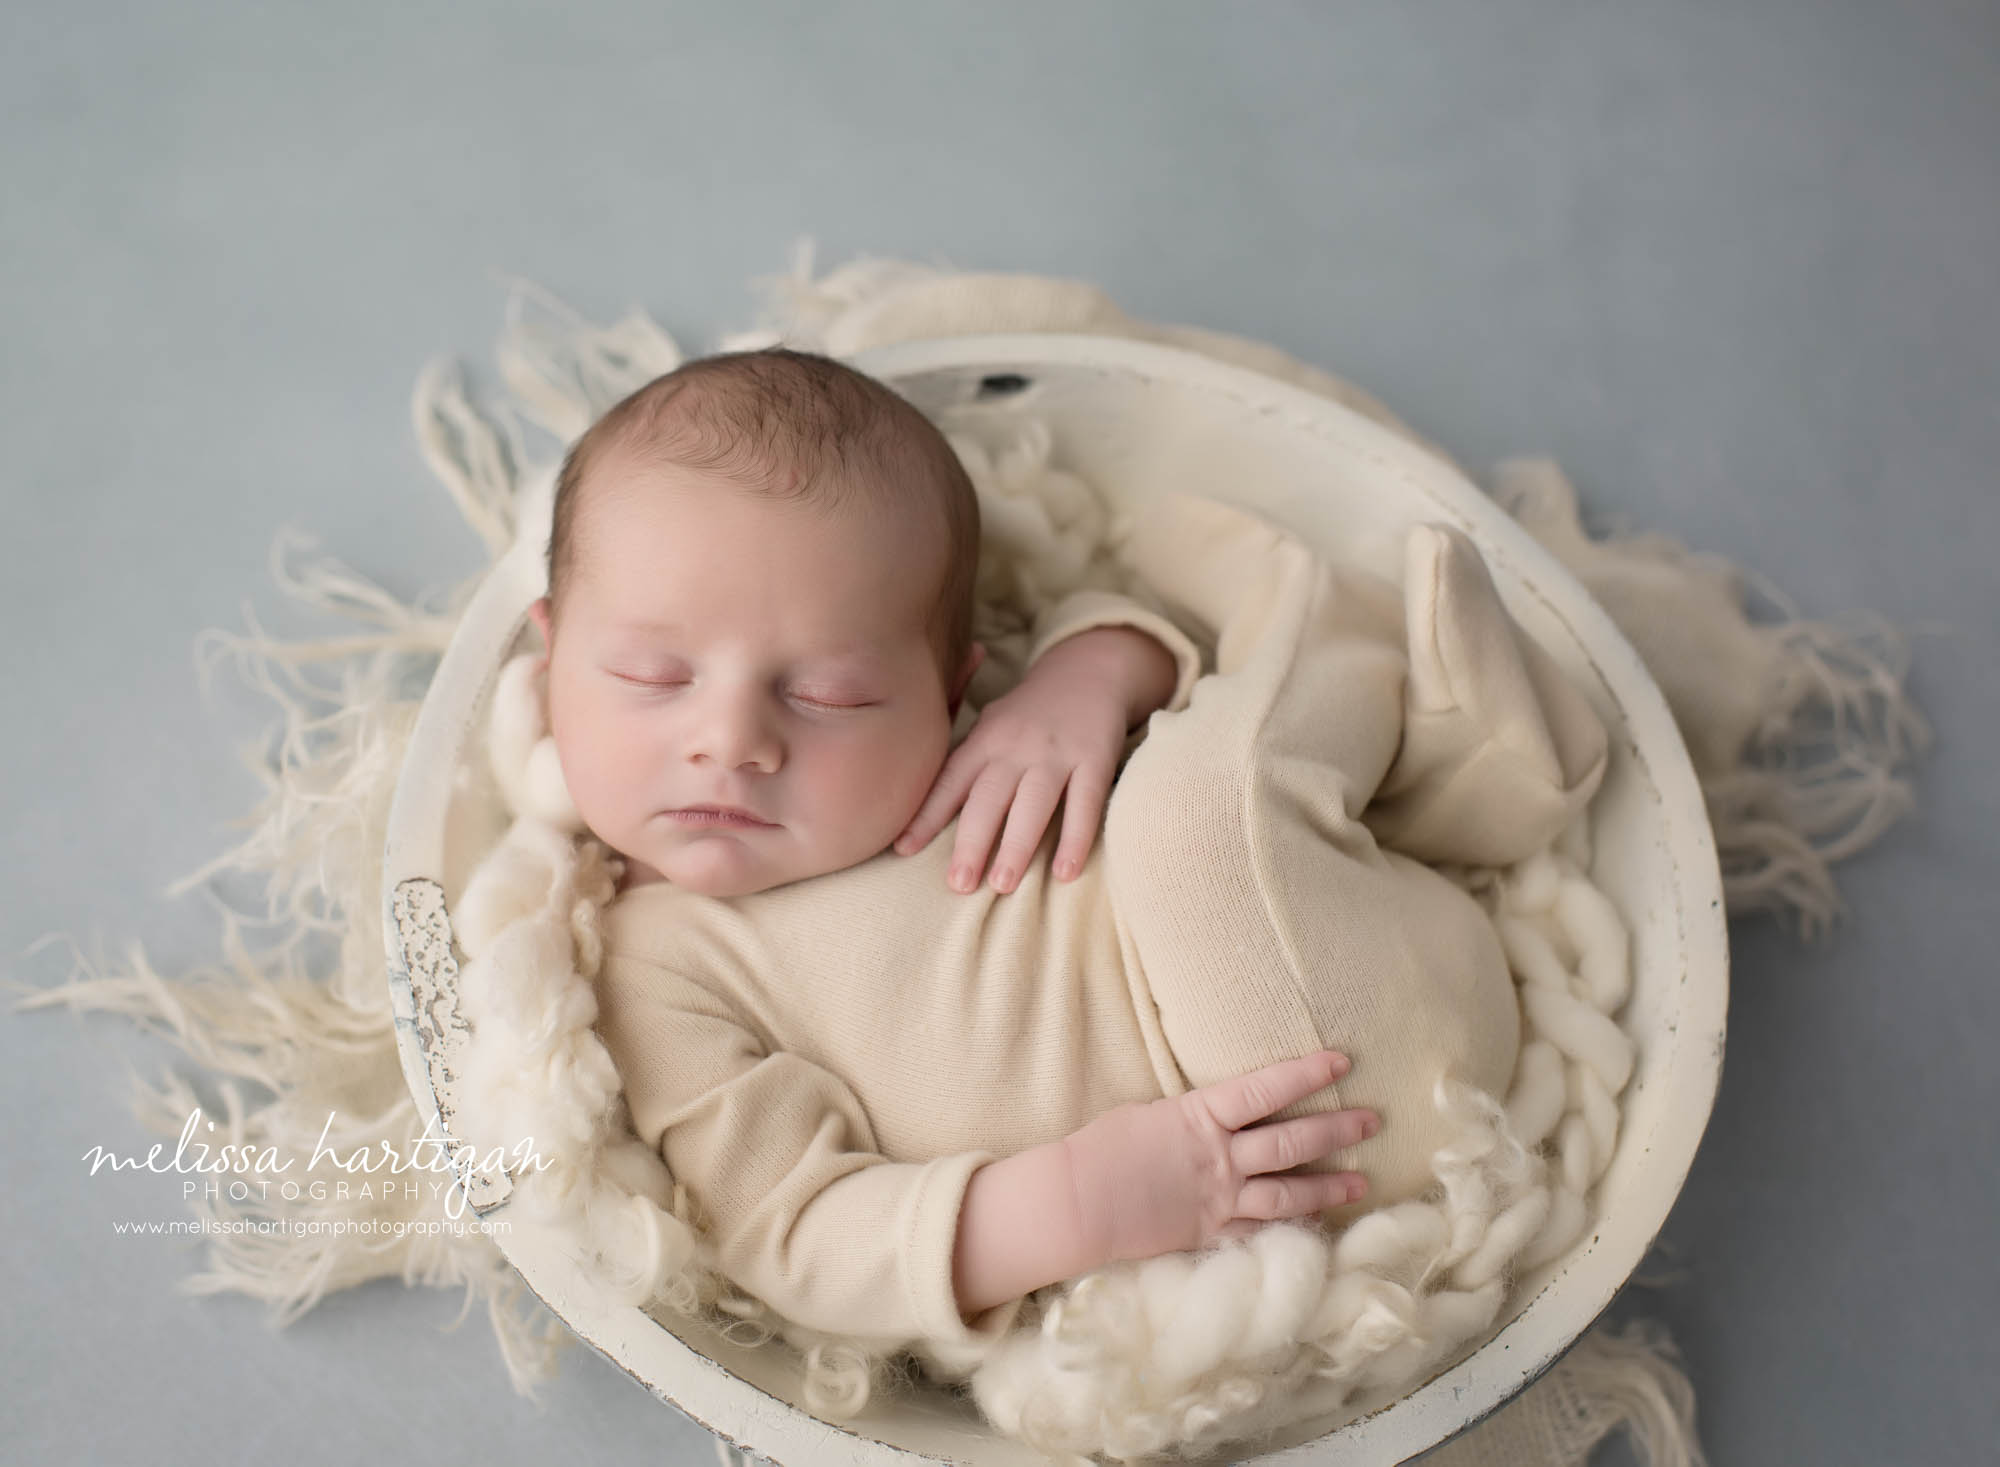 newborn baby boy posed in wooden bowl with cream colored fluff wearing cream outfit newborn photography connecticut